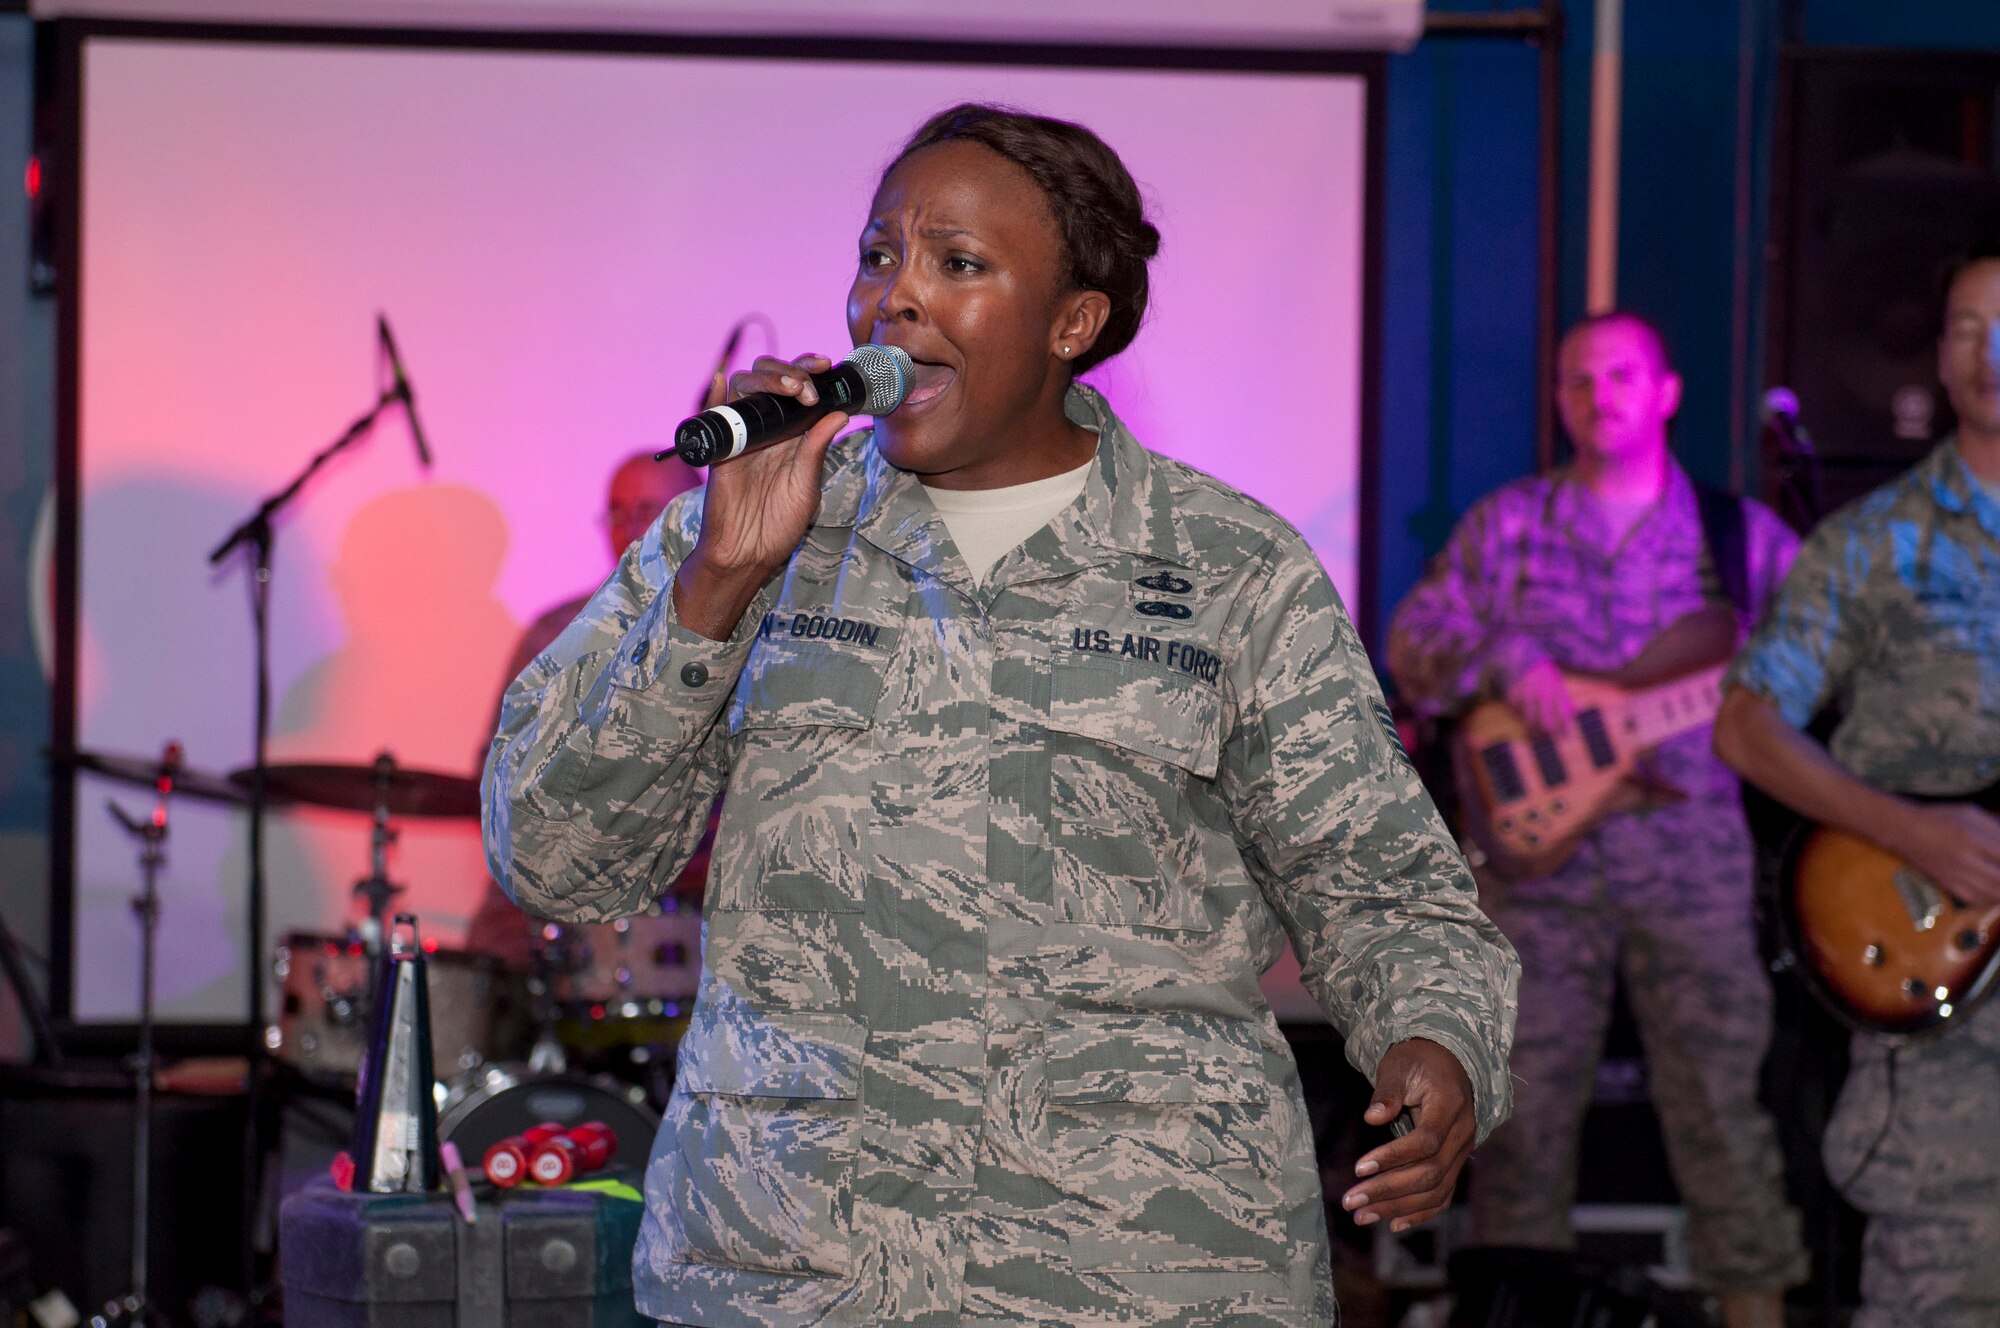 Tech. Sgt. Keisha Gwin-Goodwin, lead vocalist  with Starrlifter,  sings at the Drop Zone at The Rock June 17, 2014.  Starlifter is a seven-member group of talented musicians that performs in virtually every musical idiom and was here in support of Operation Enduring Freedom. (U.S. Air Force photo by Senior Master Sgt. Allison Day)